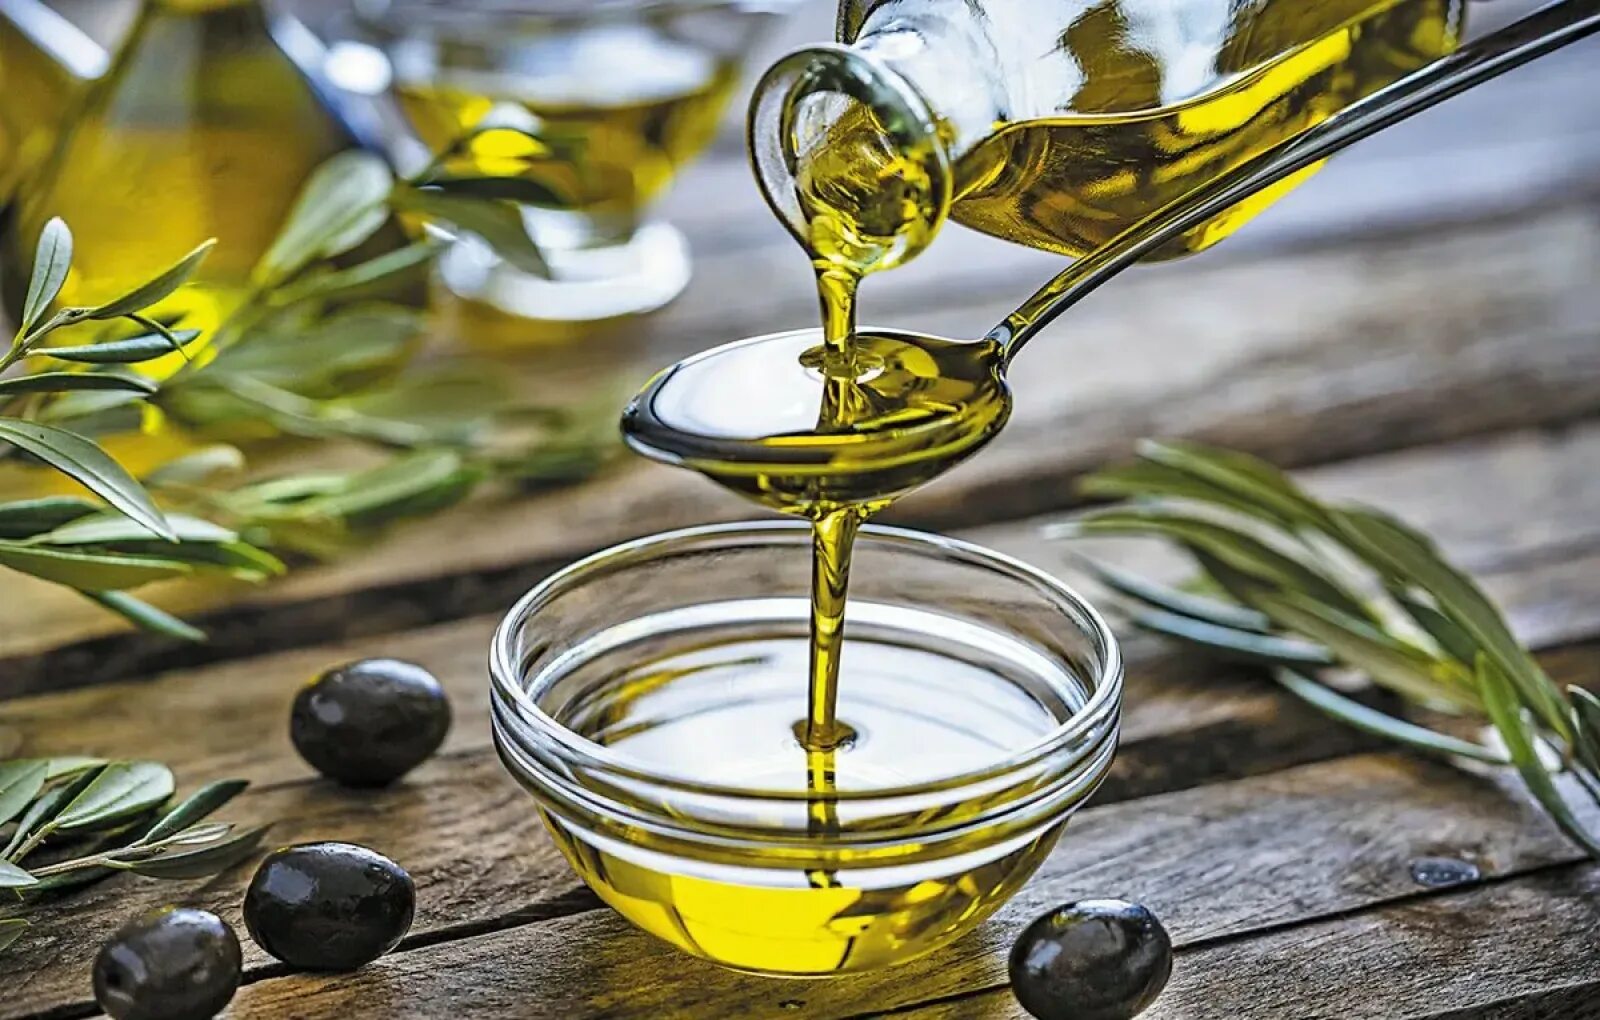 Olive Oil масло оливковое. Олив Ойл масло оливковое. Масло с оливковым маслом. Оливки и оливковое масло.